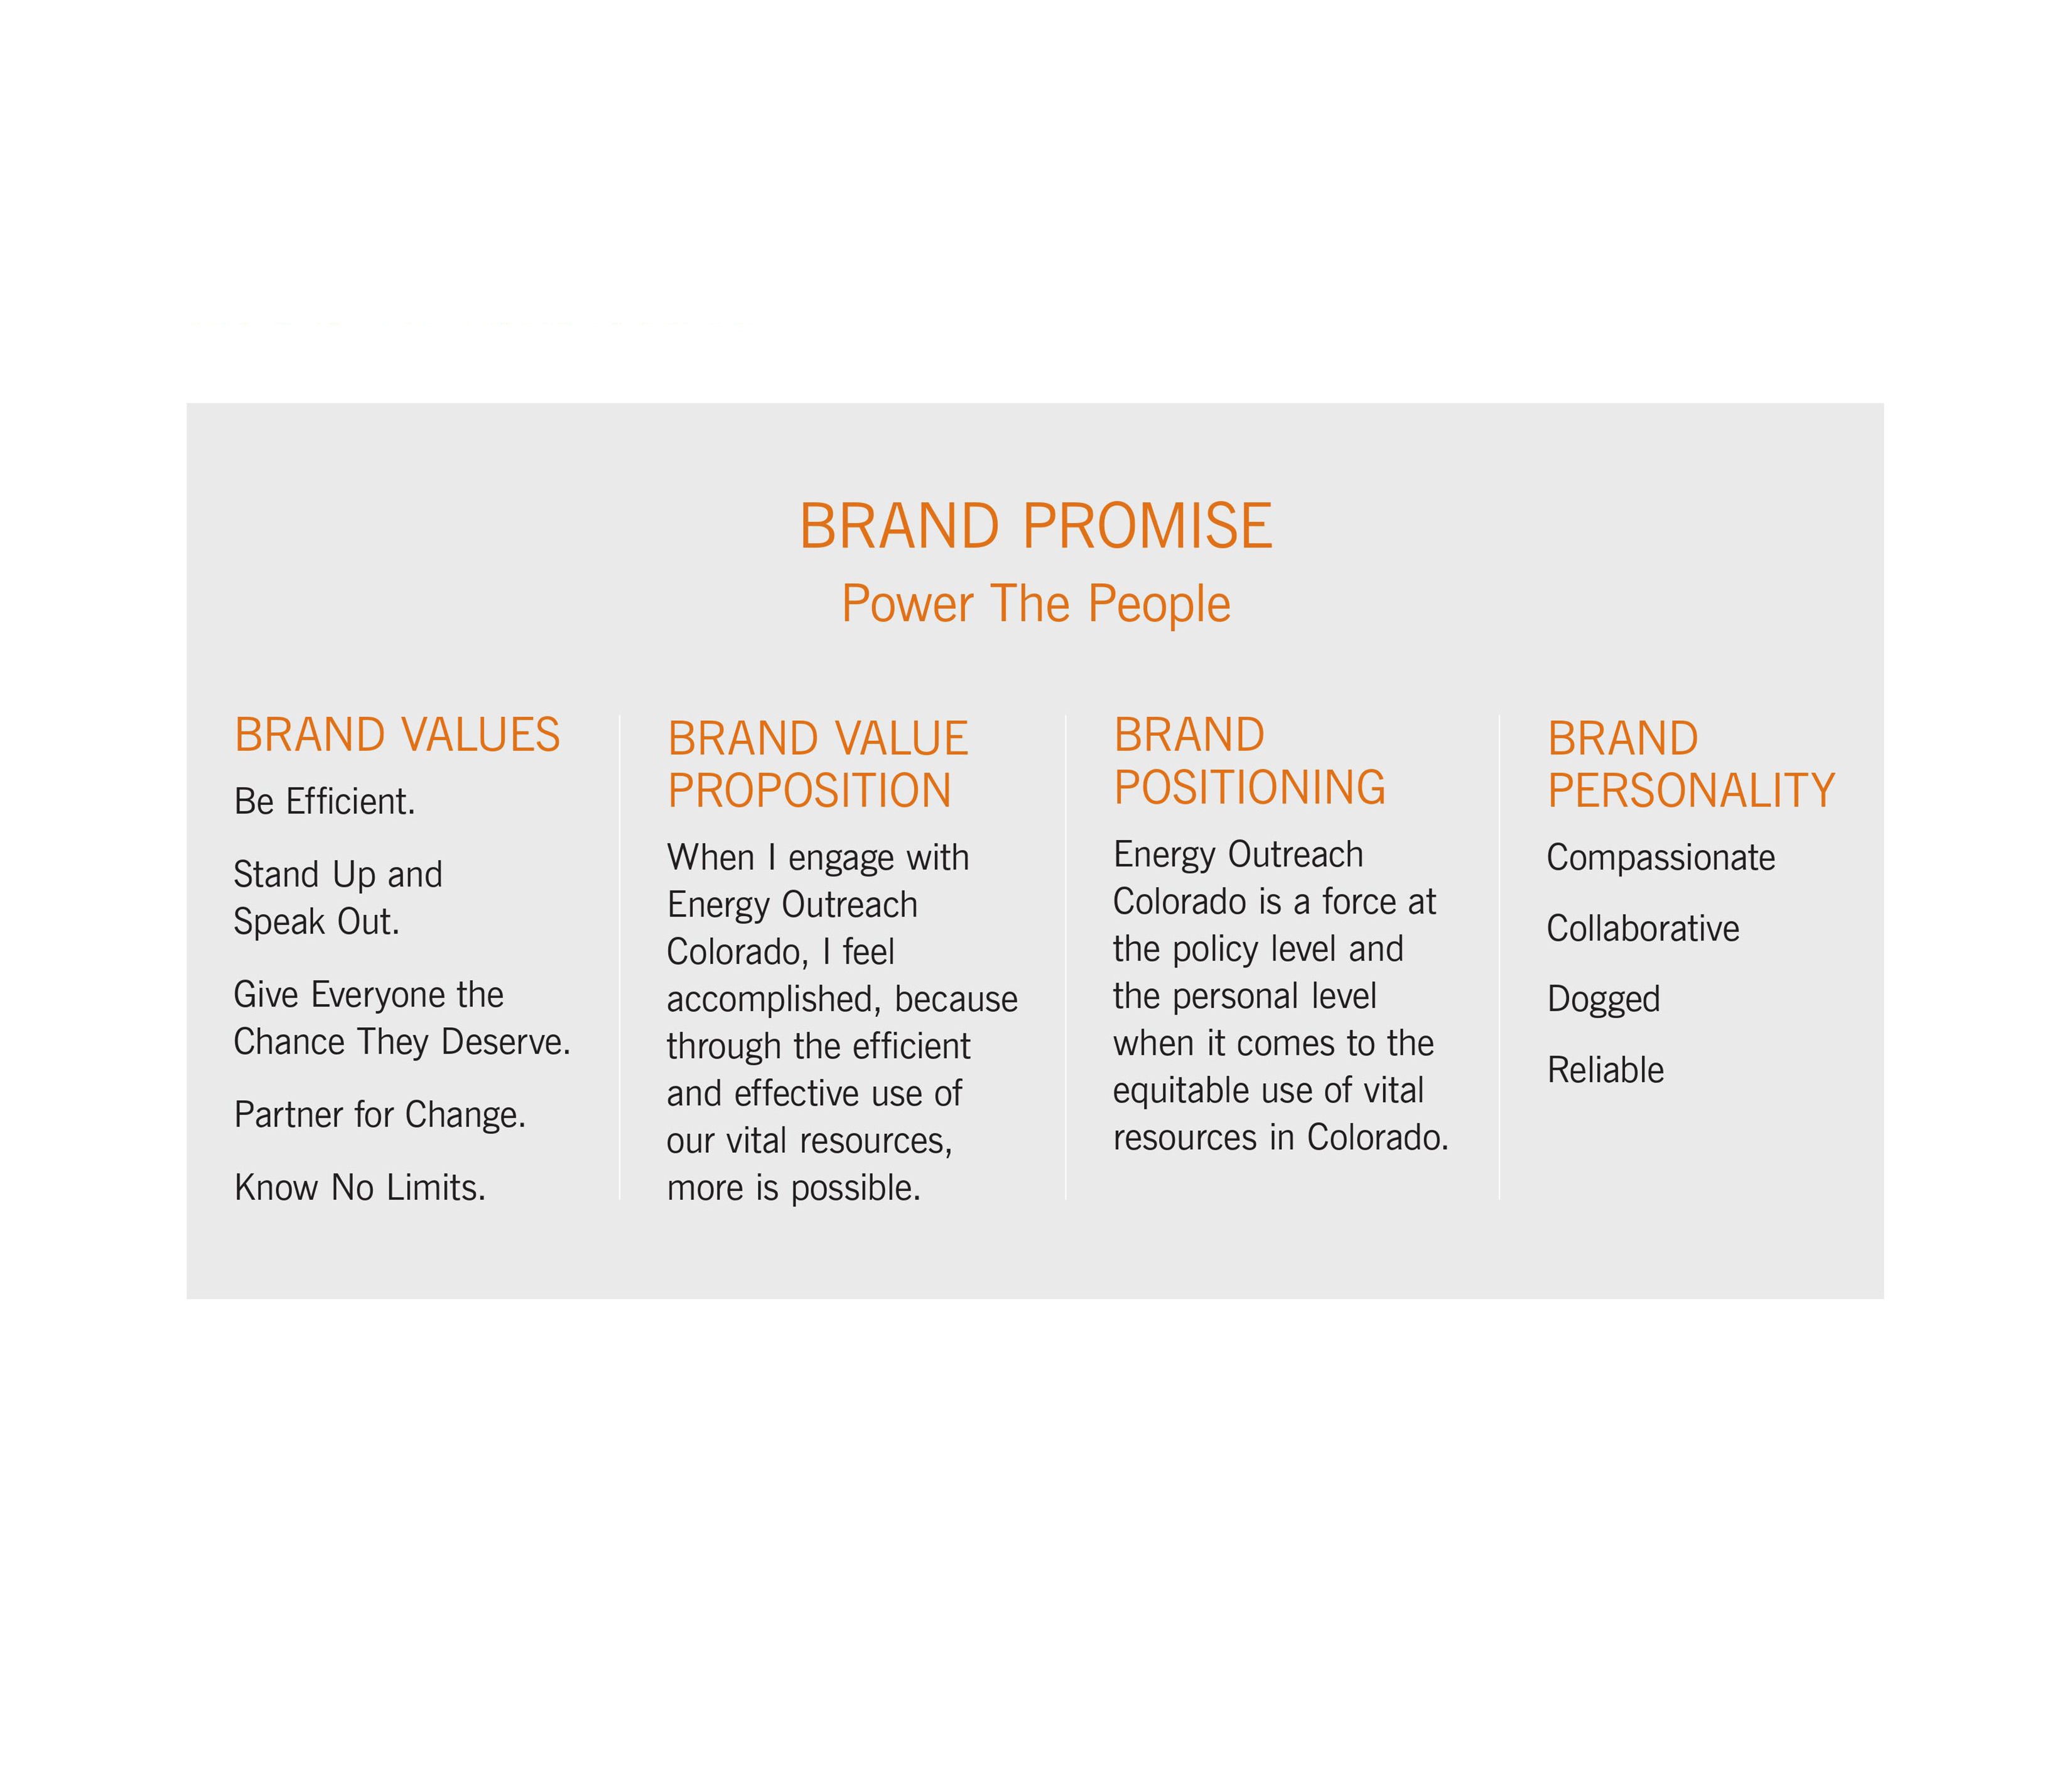 Brand qualities, personality, and other branding attributes